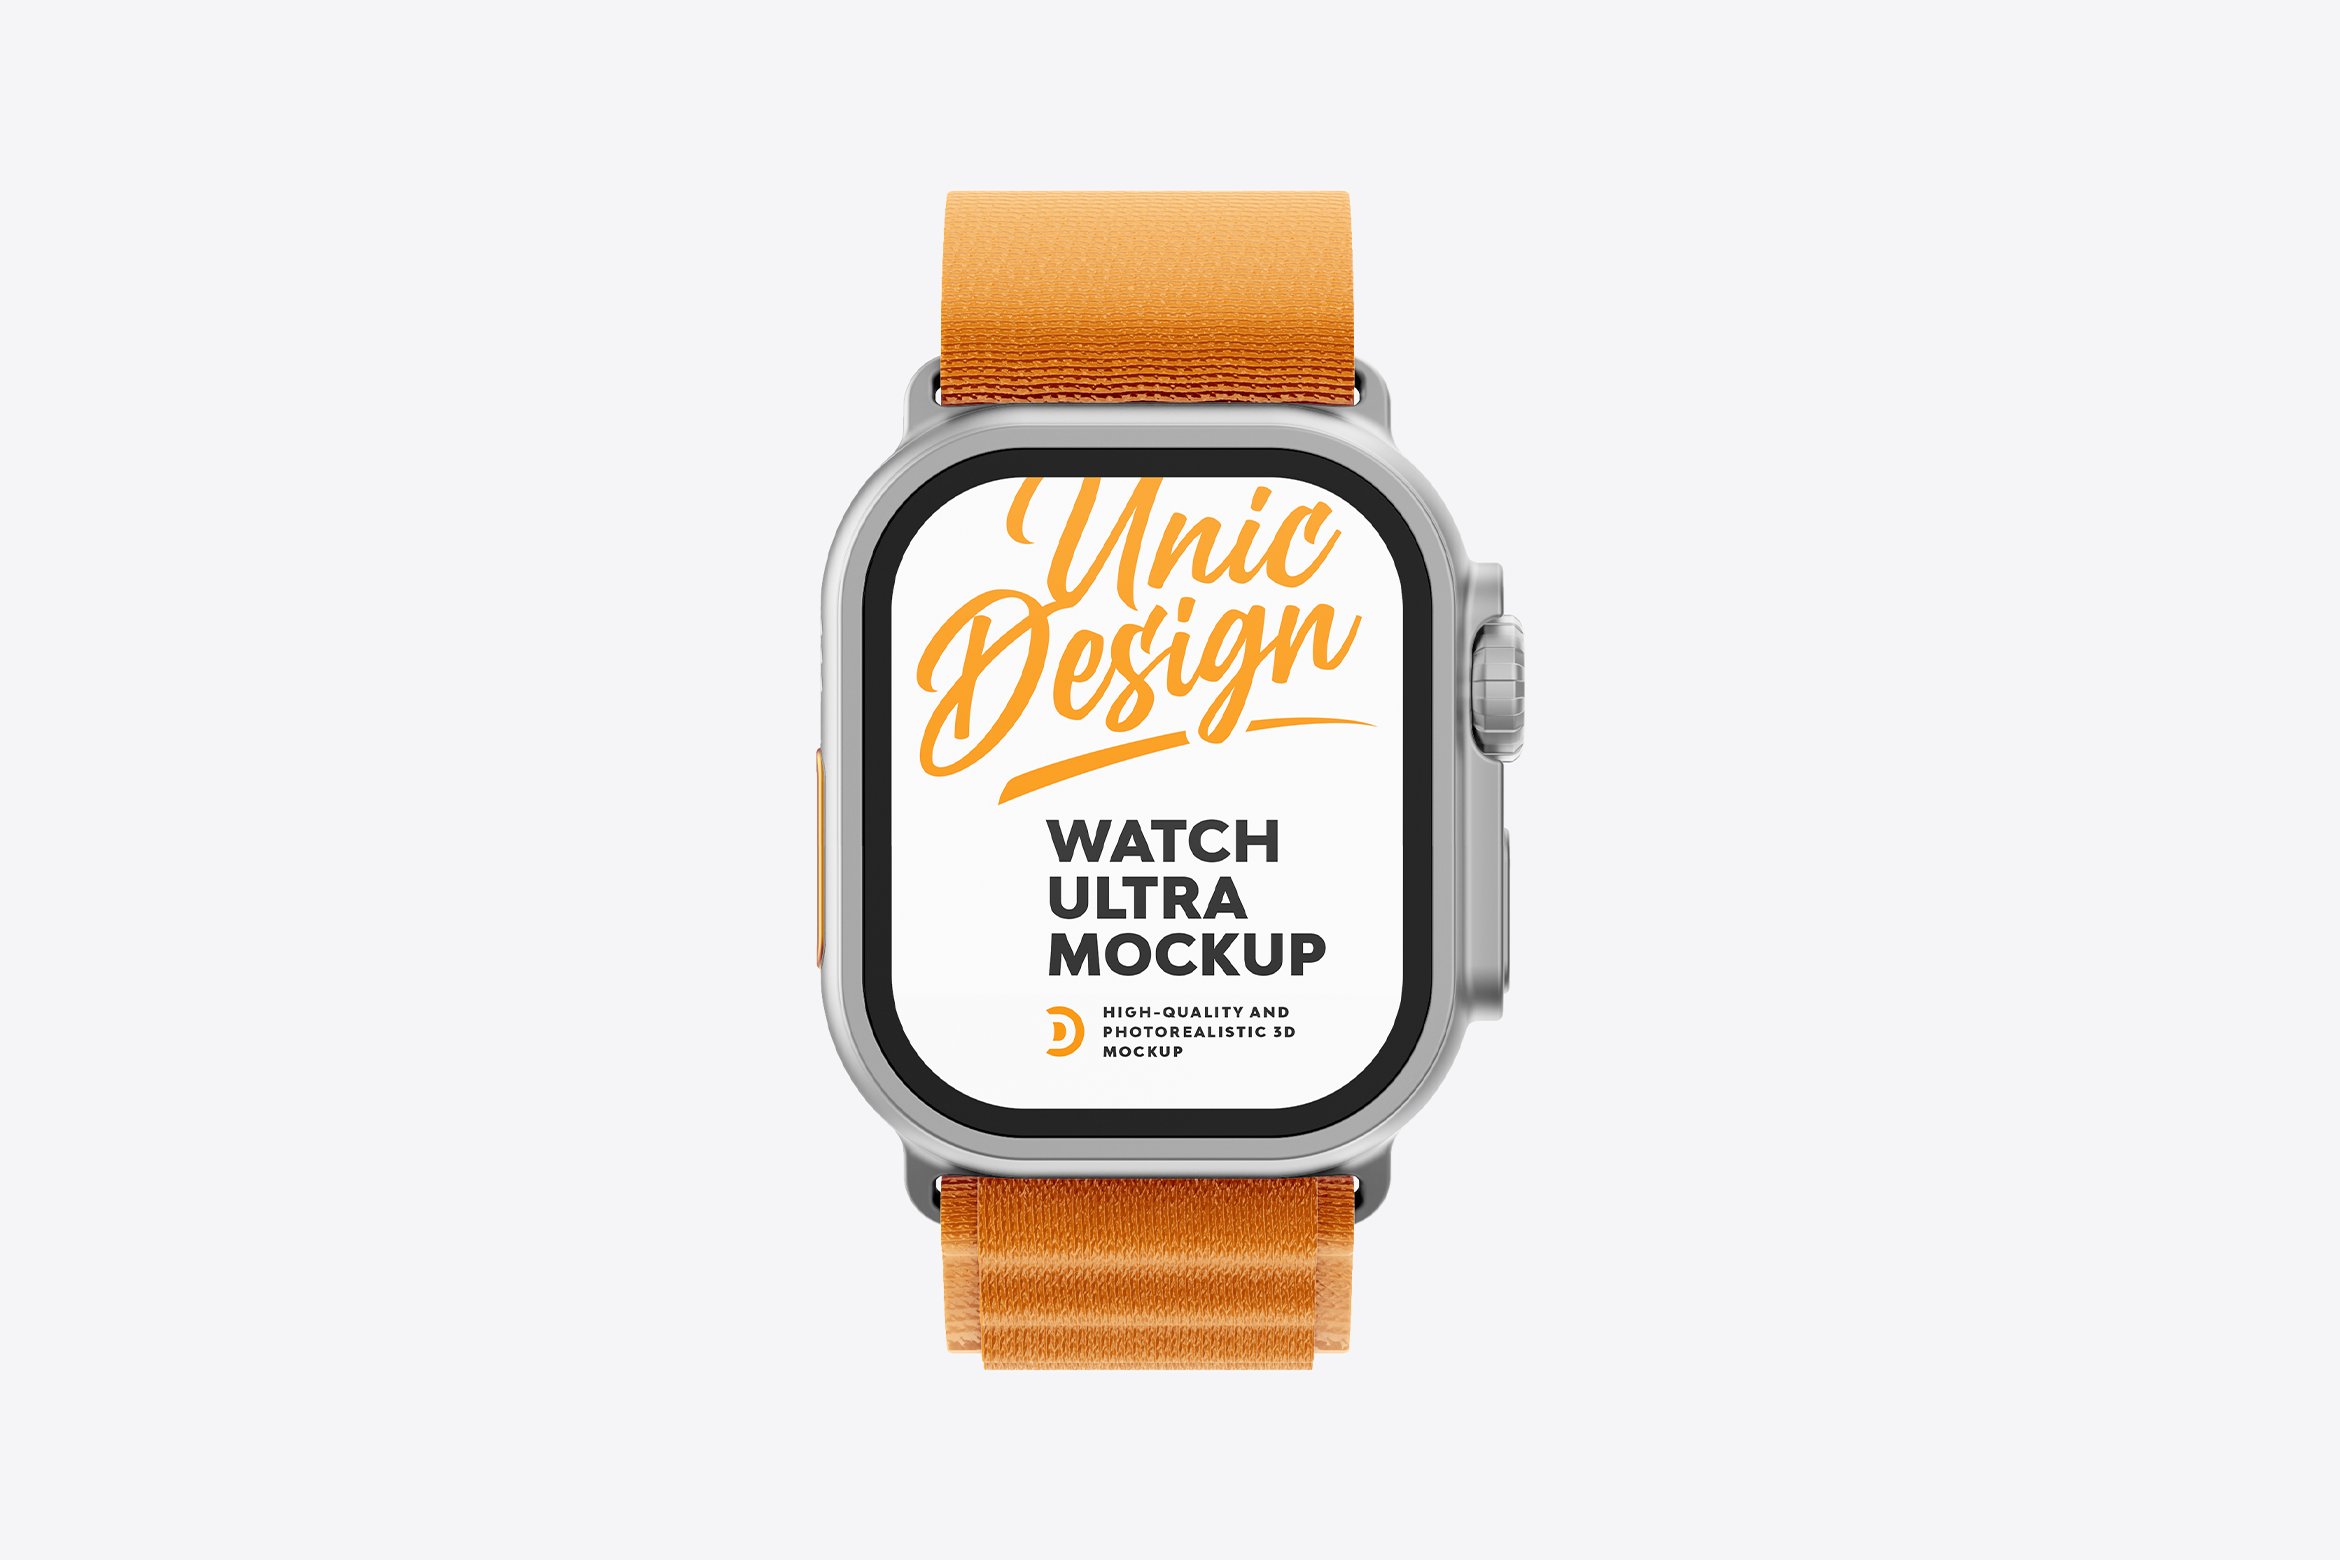 Watch Ultra Mockup cover image.